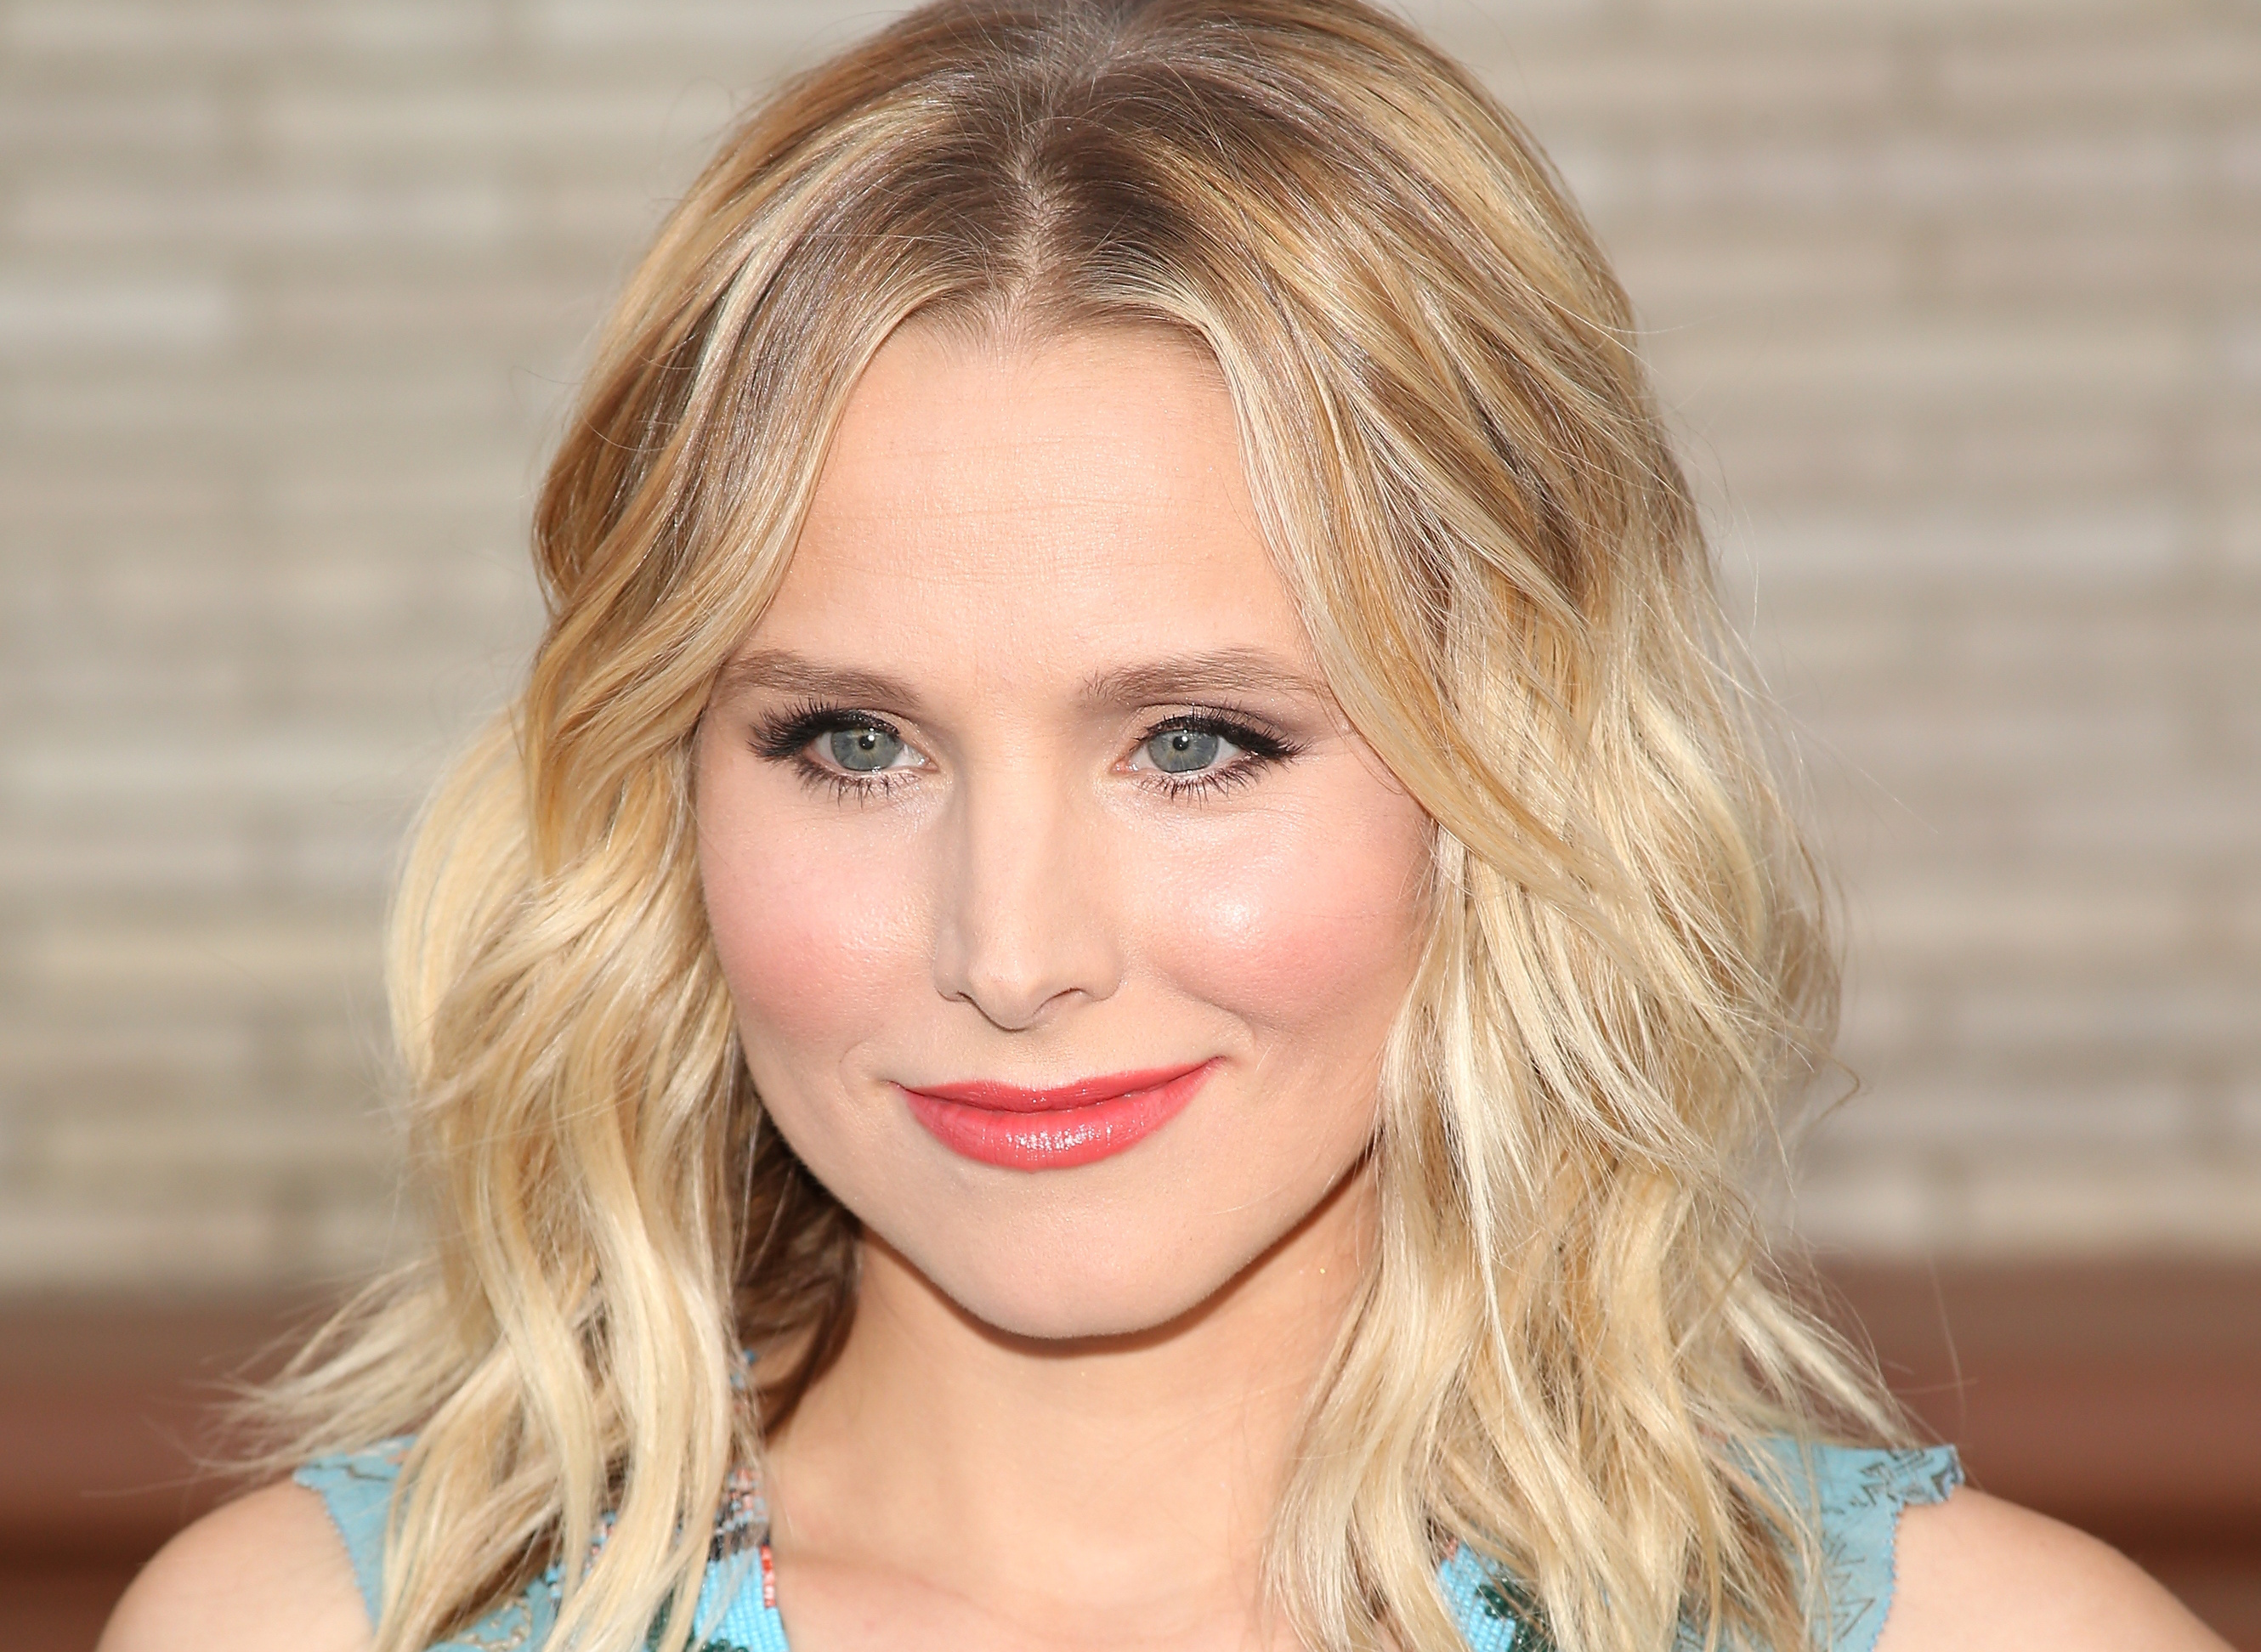 120+ Kristen Bell HD Wallpapers and Backgrounds